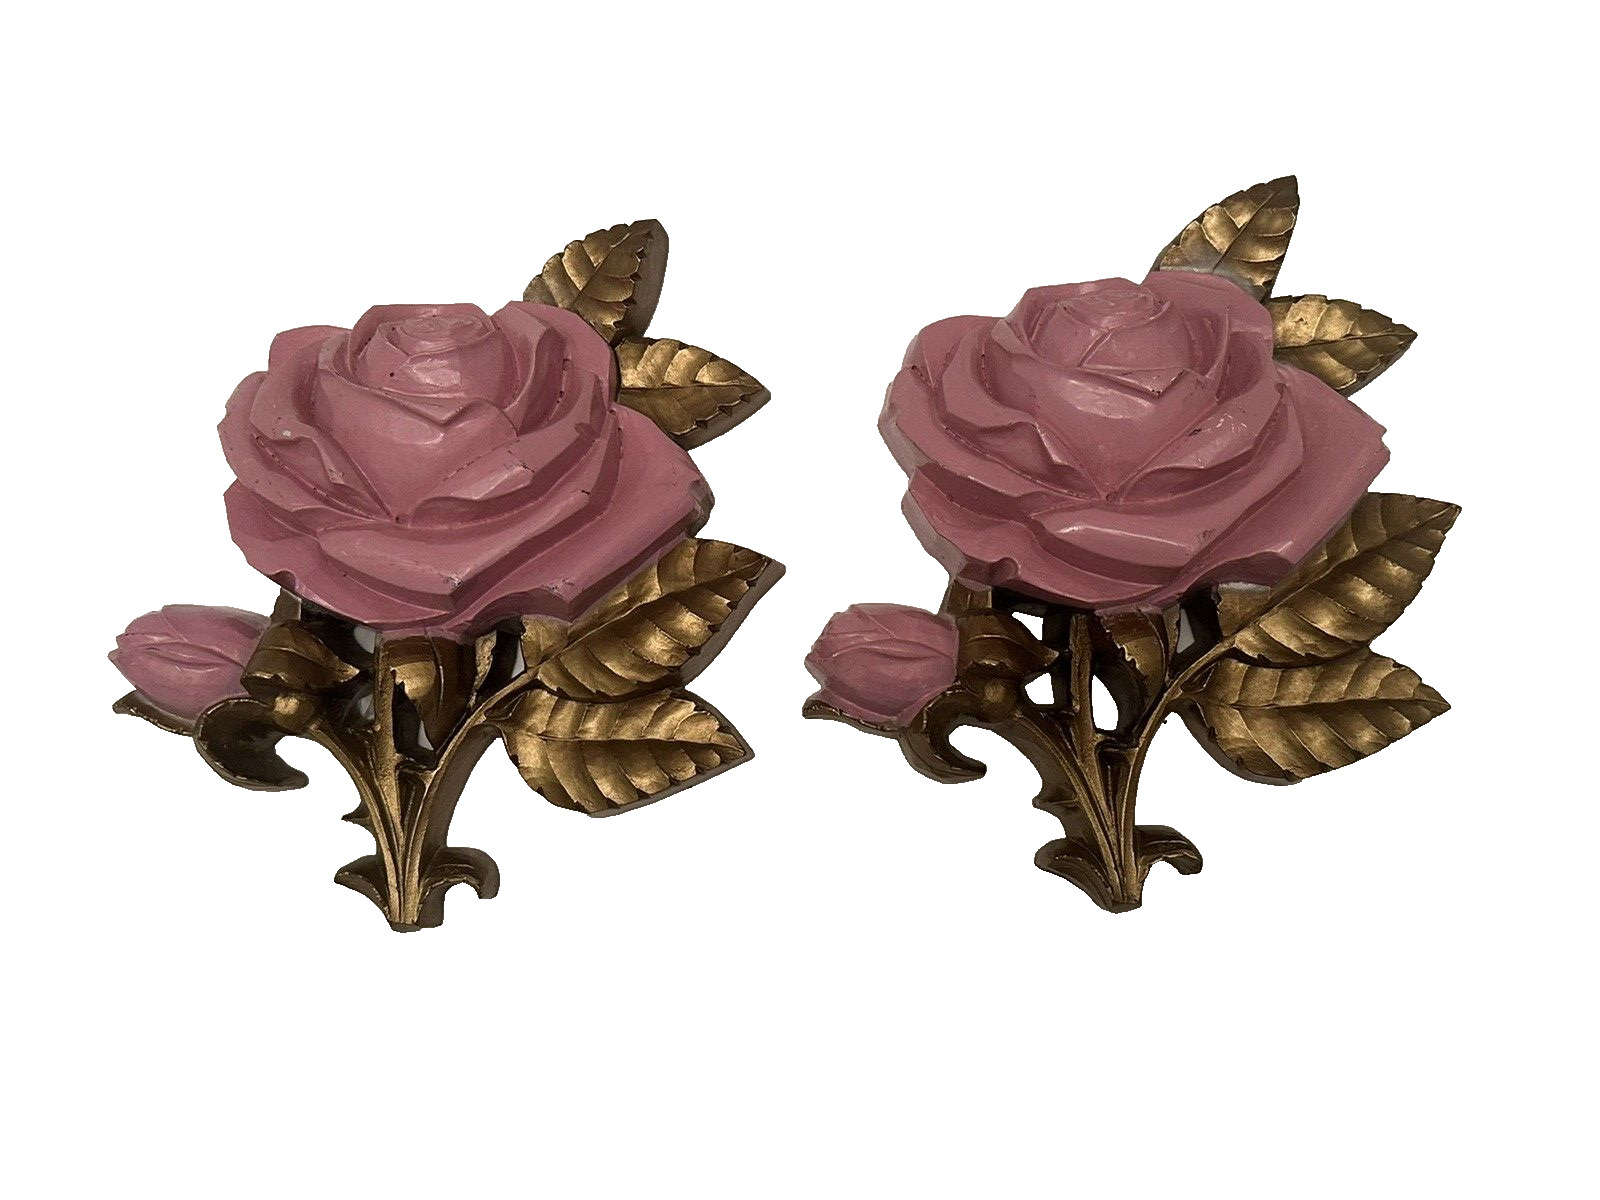 Vintage PAIR HOMCO PINK Rose Wall Plaques Decor KITSCH Plastic *SEE DETAILS*